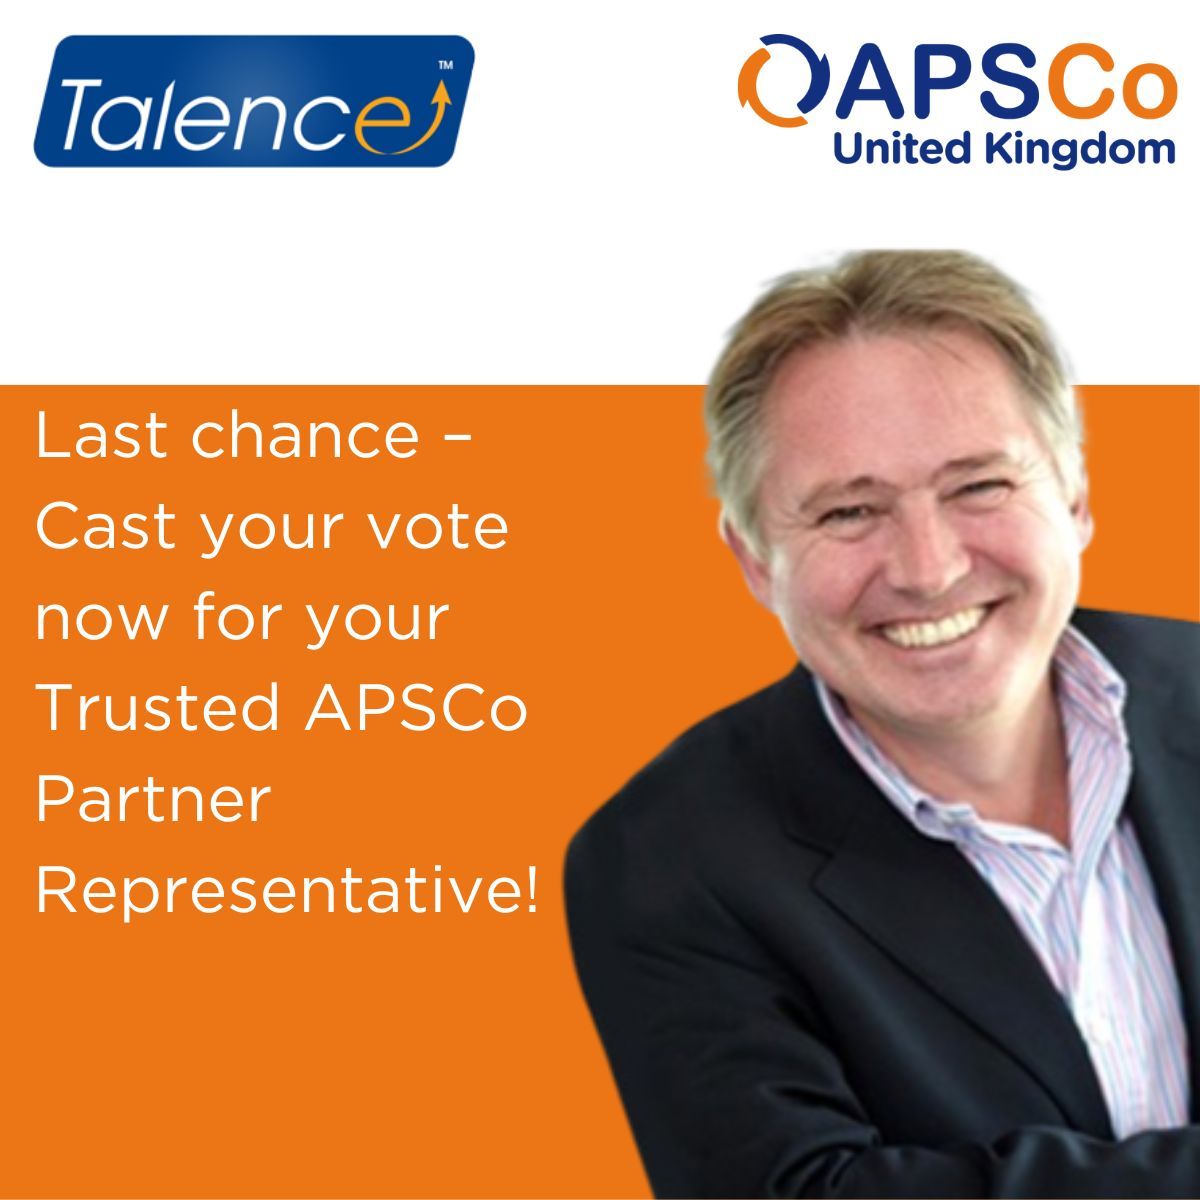 ast chance to vote! With 40 years in recruitment, including senior roles within APSCo, I bring extensive experience. Recognized as a Top 10 Global Influencer on the future of work, I'm committed to shaping our industry ethically. Vote before March 21st, 5 pm! #APSCo #Recruitment